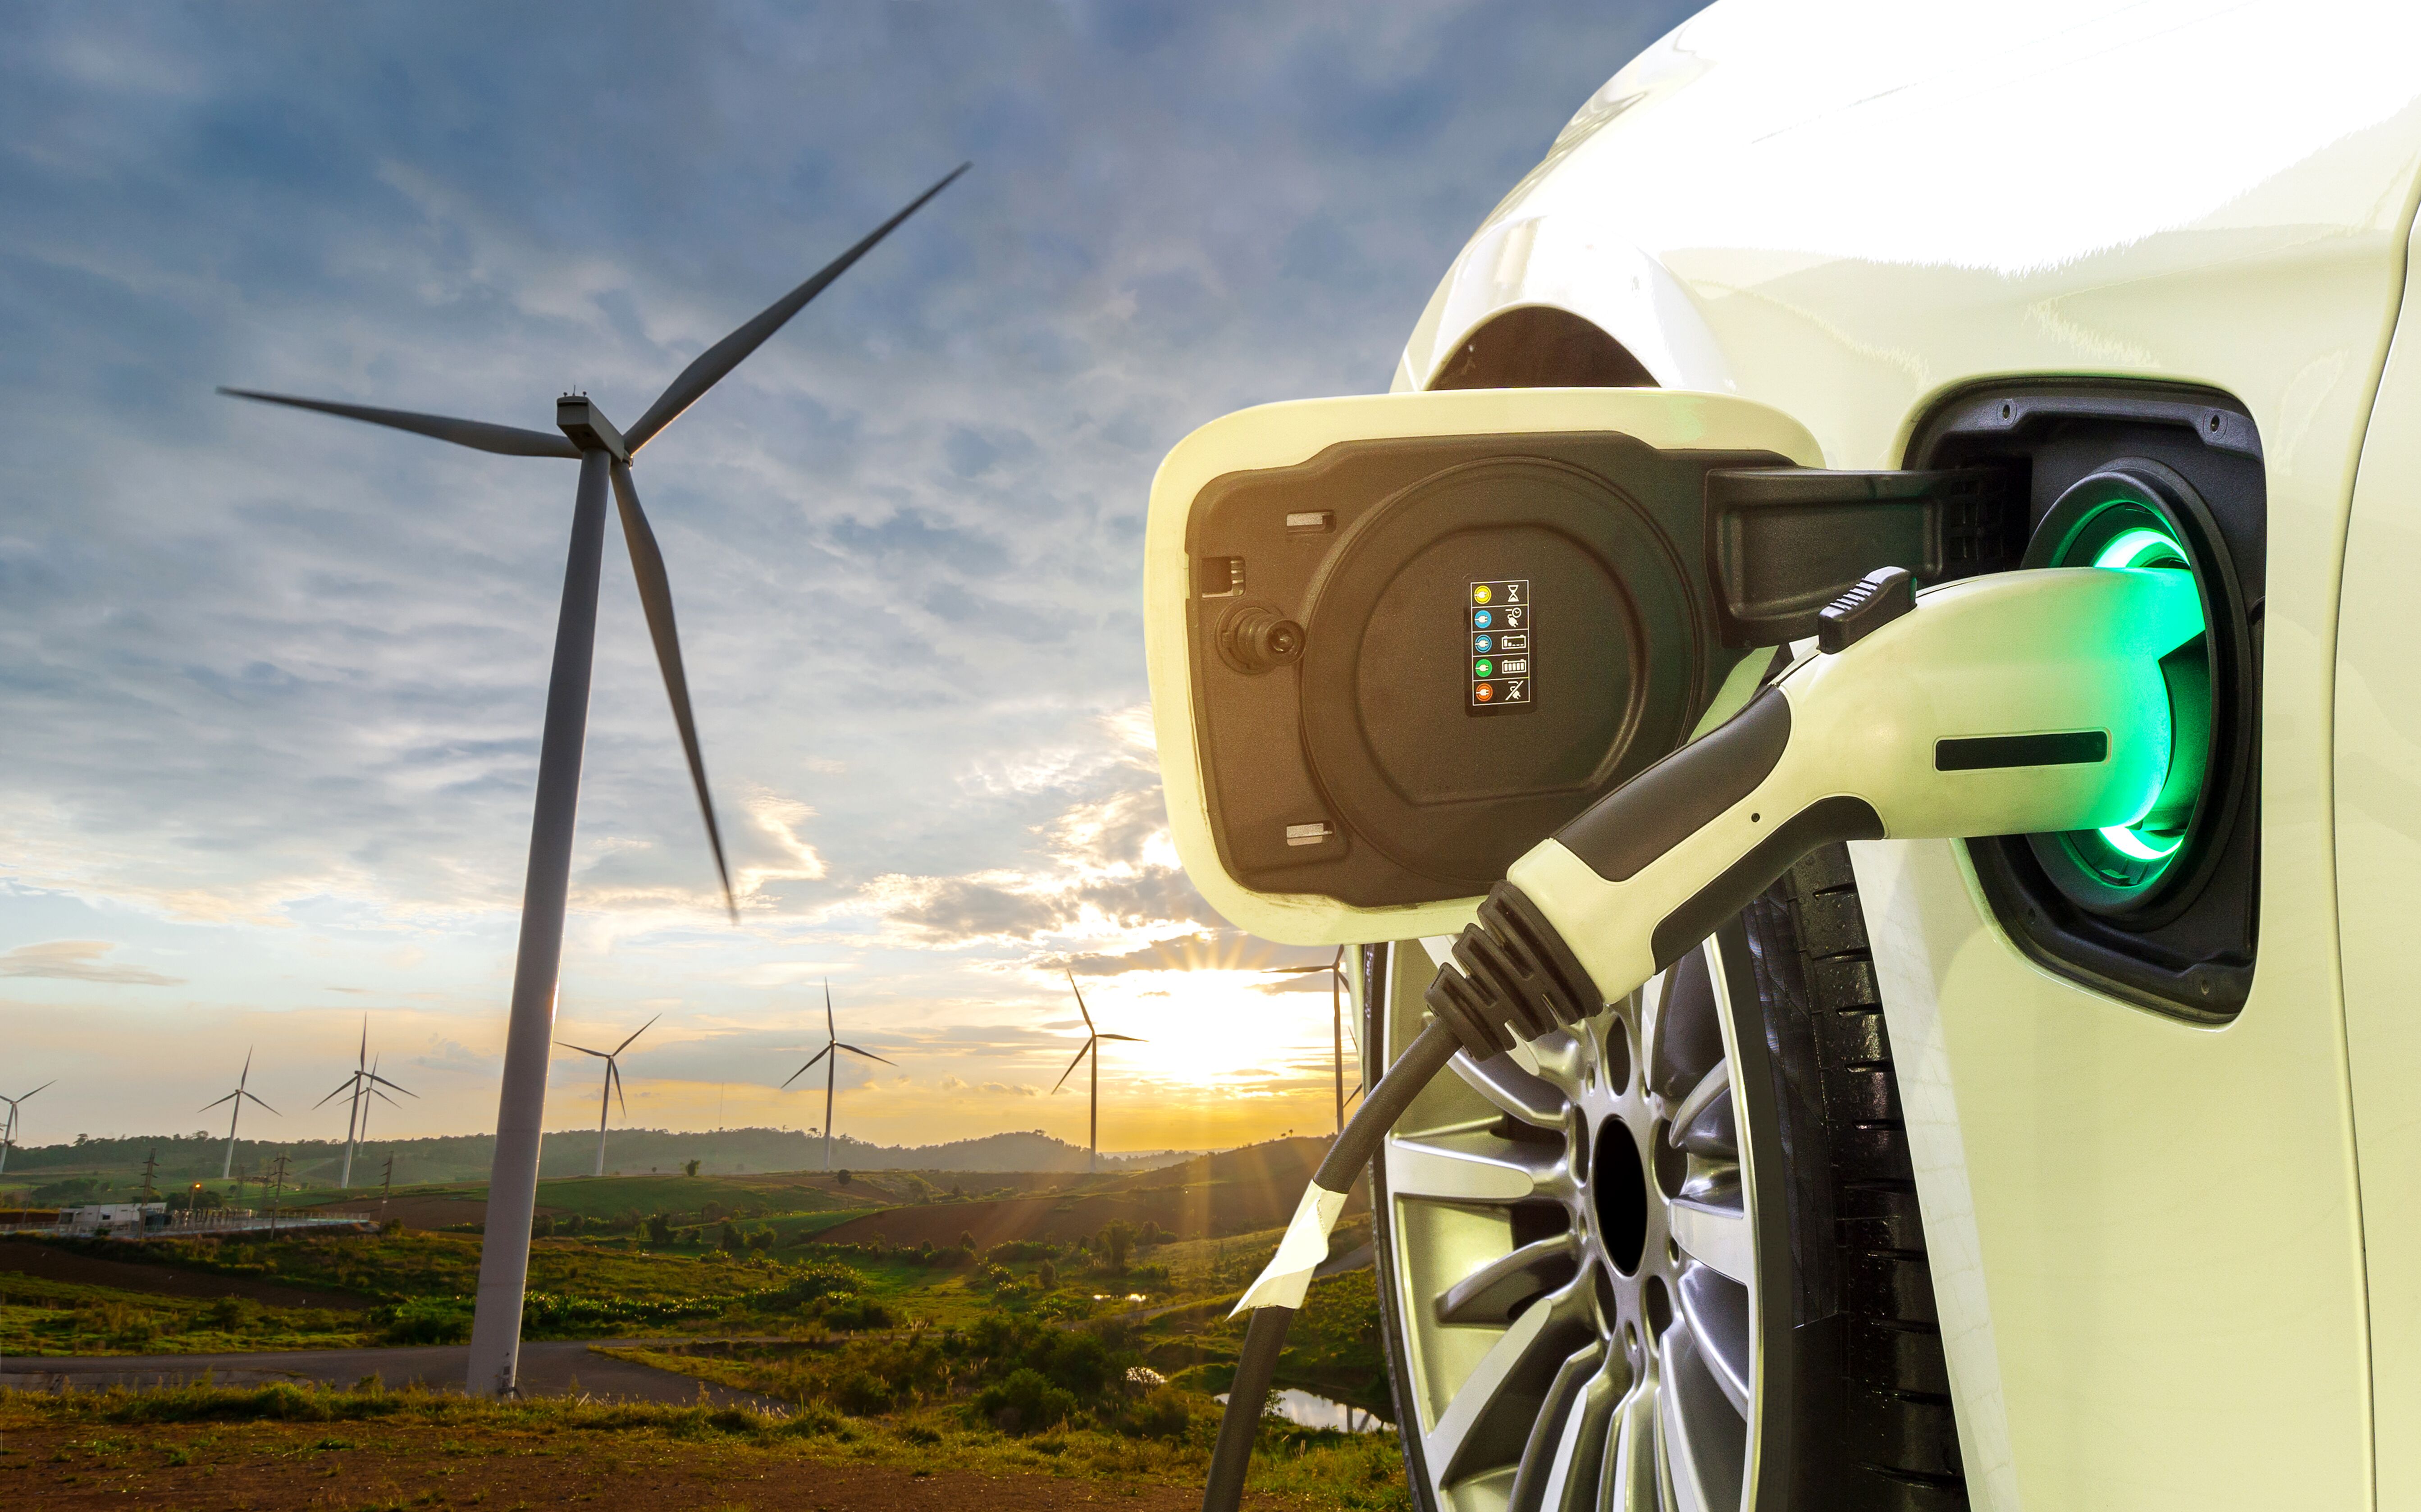 Image of a wind farm with the sun setting behind it with an electric vehicle in the foreground with its electrical port open and a charging cord plugged in